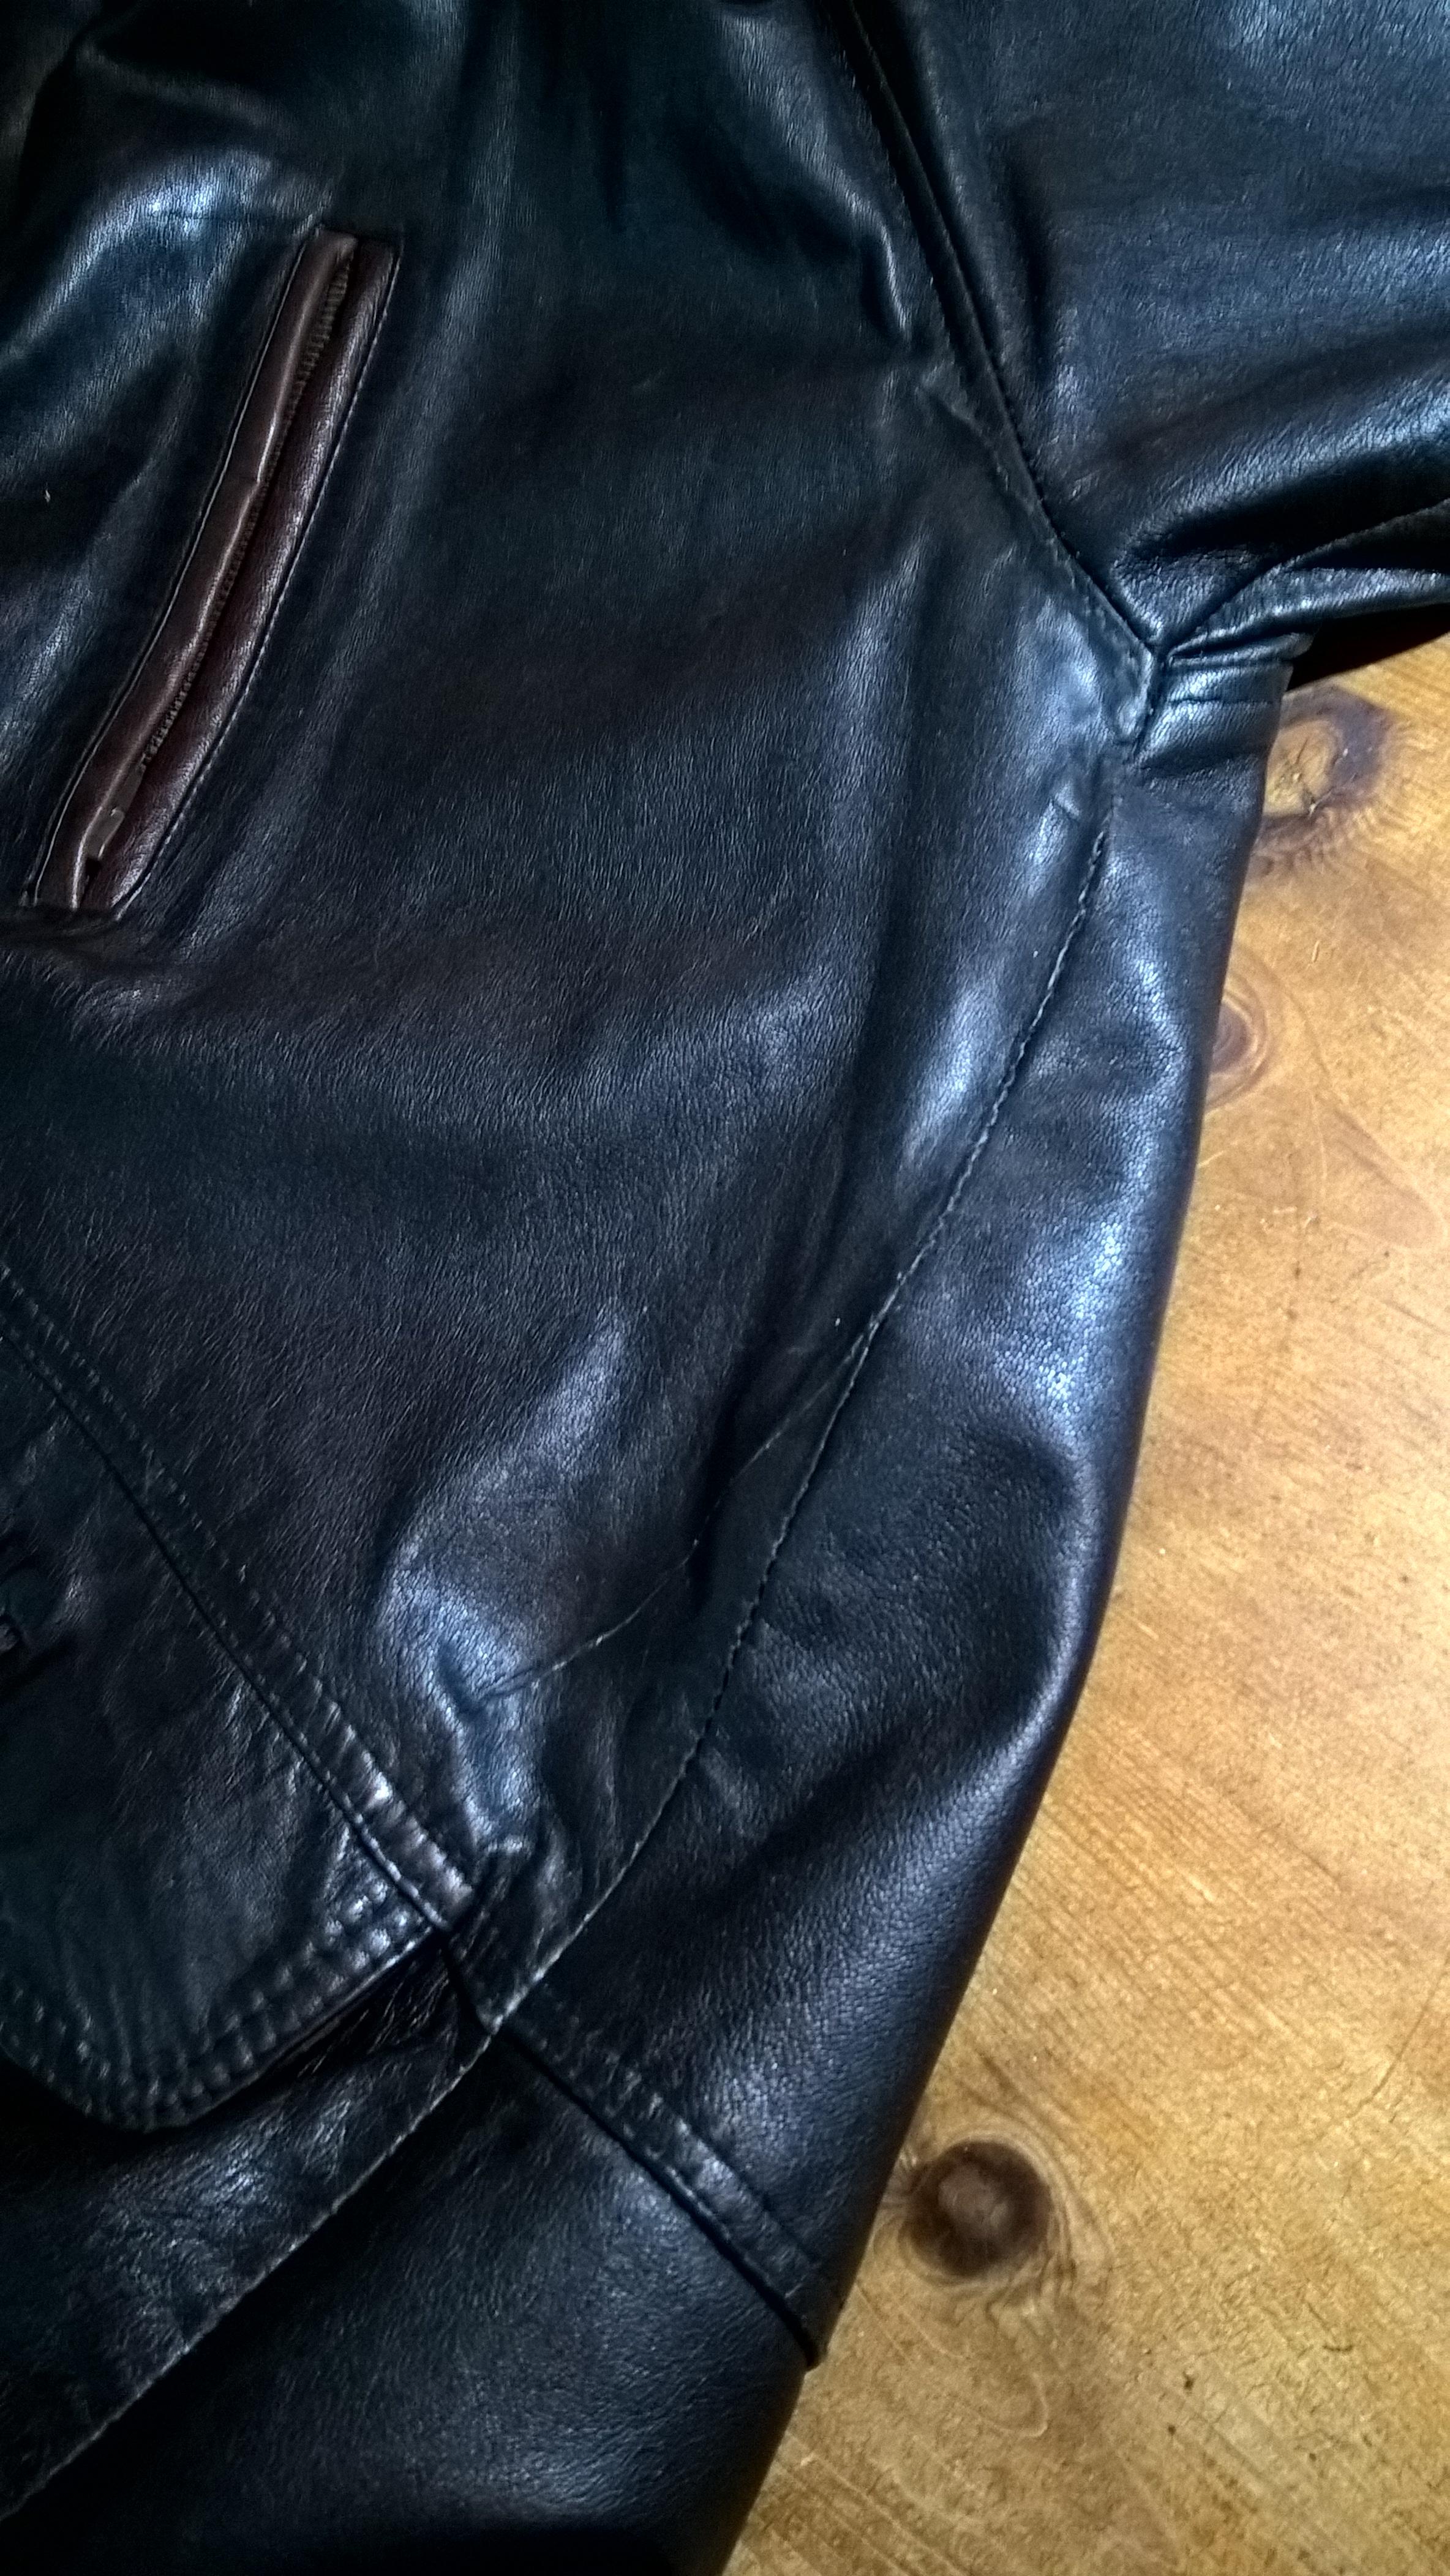 A tear repaired for this soft, lamb leather jacket